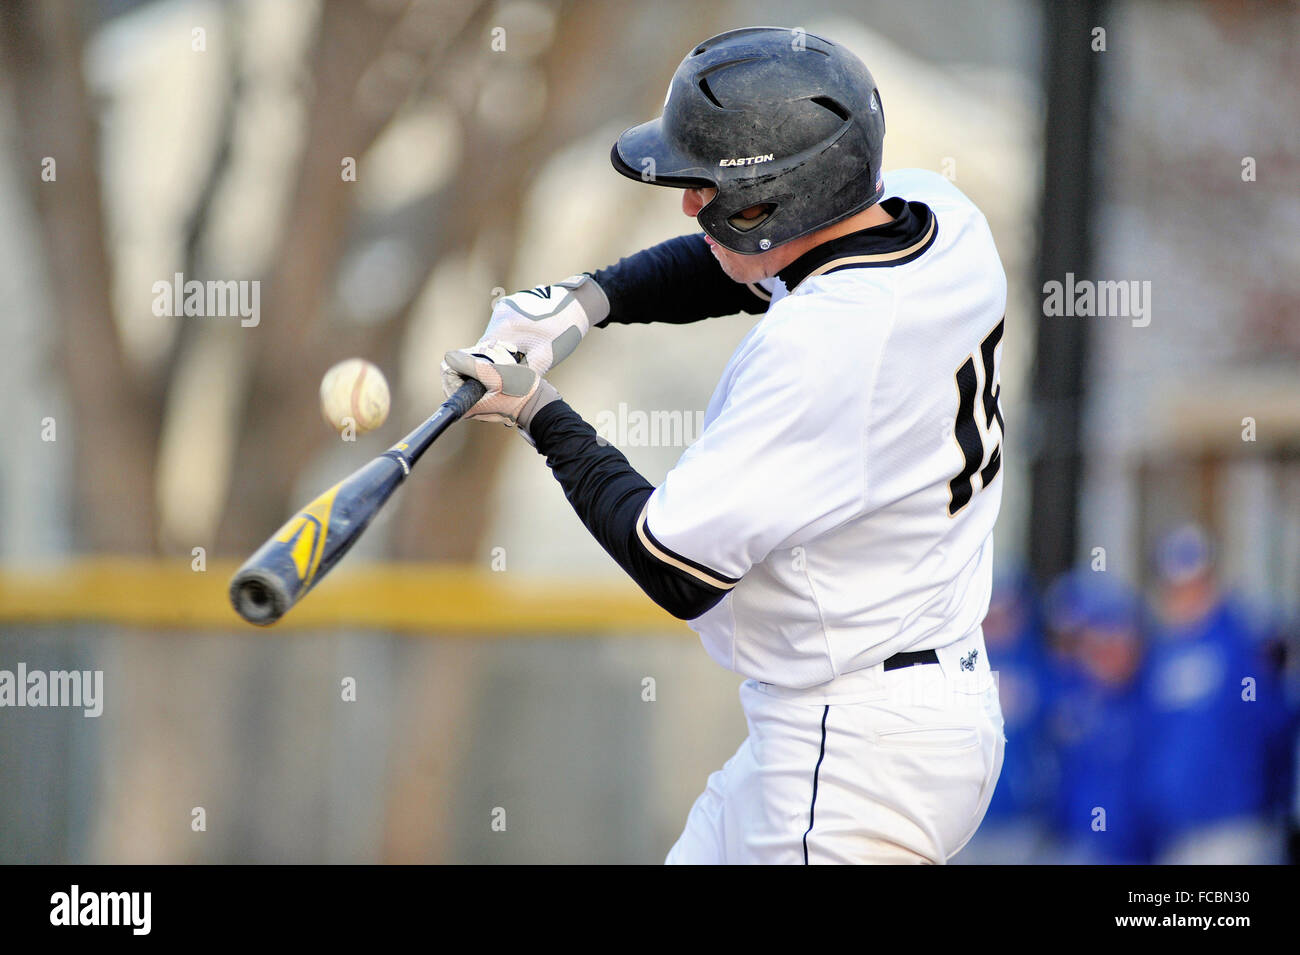 A batter making contact during a high school baseball game. USA. Stock Photo